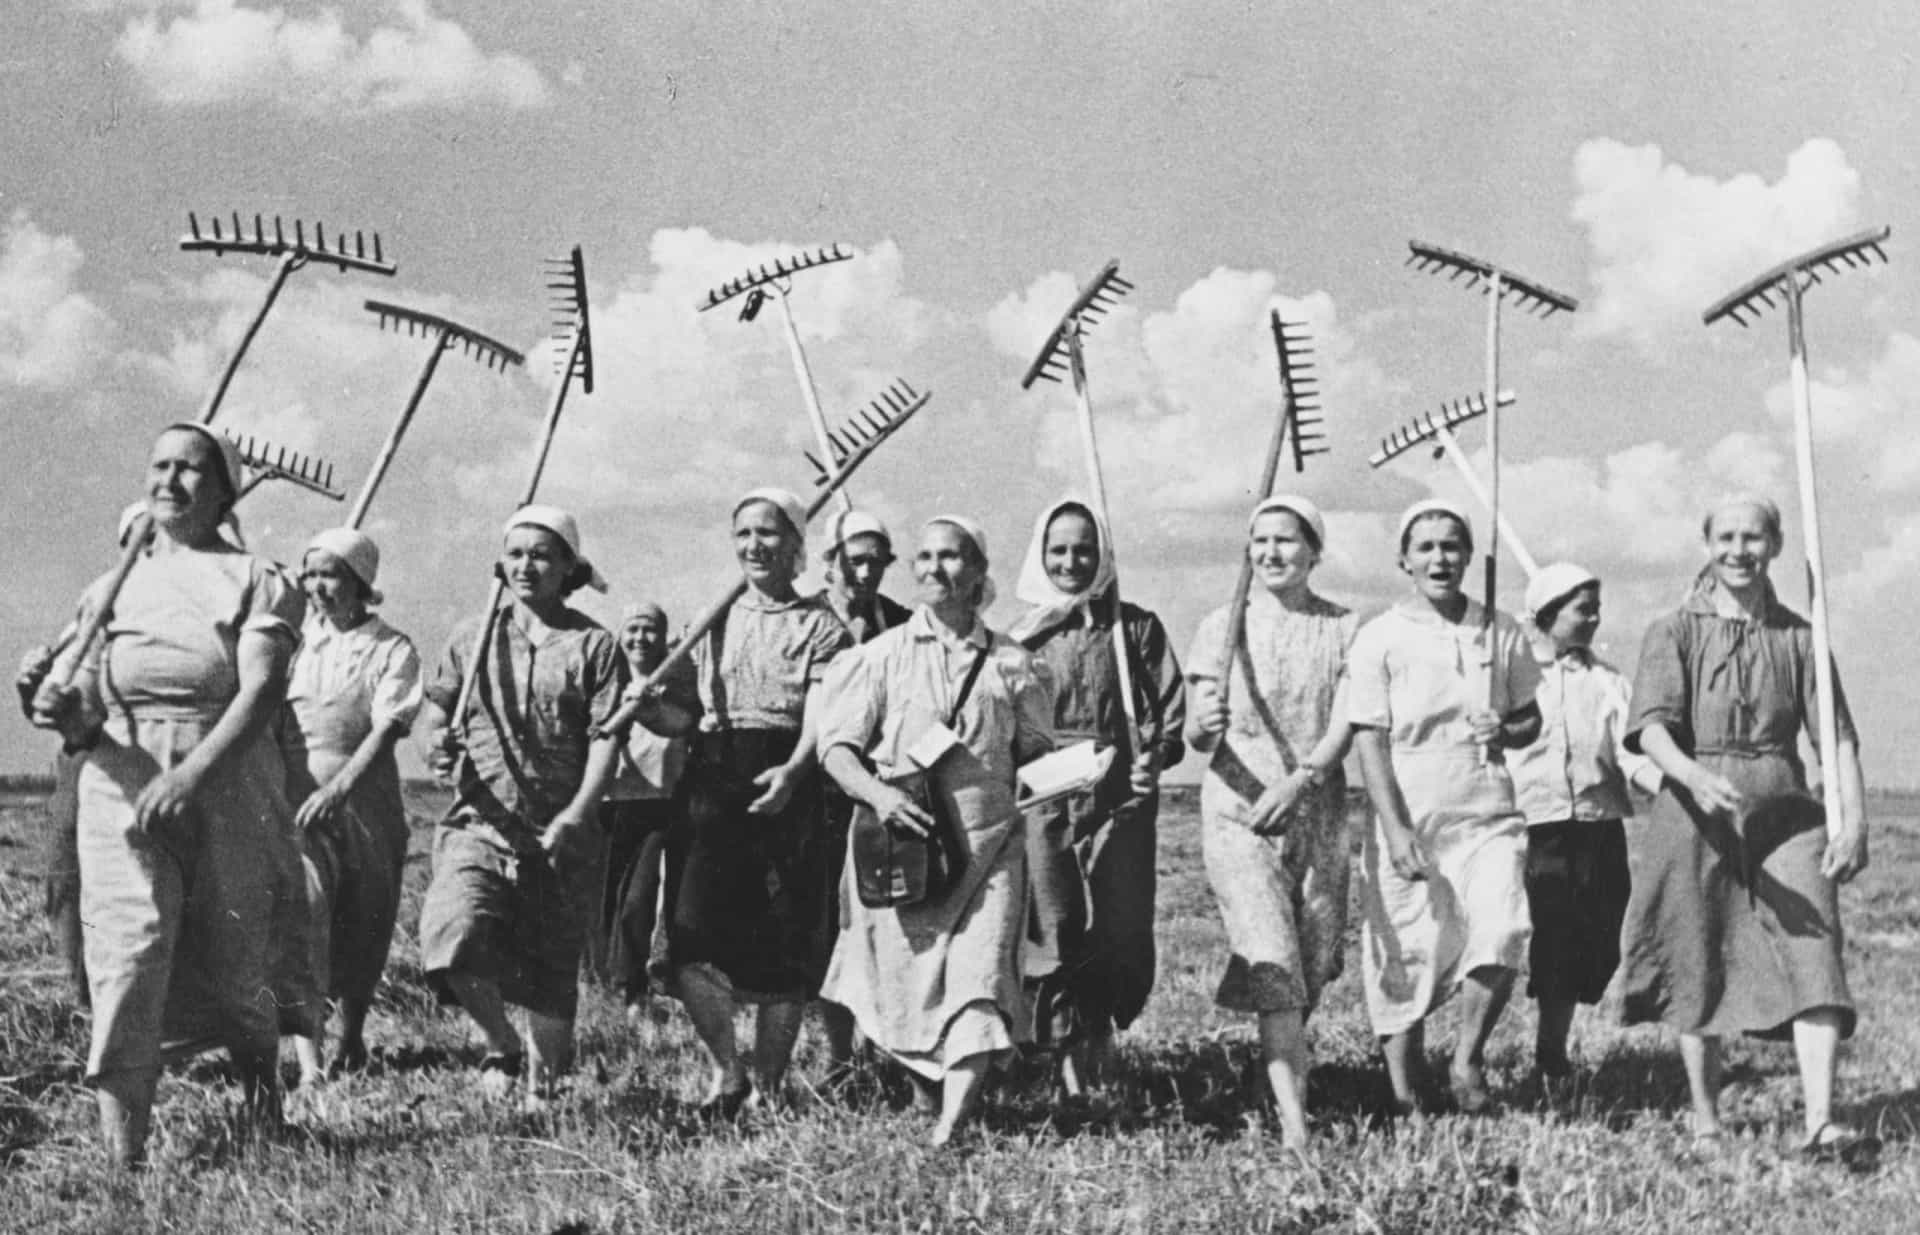 <p>Elsewhere, women took to the vast steppes of the Russian countryside as collective farmers to replace men who had left for the front.</p><p>You may also like:<a href="https://www.starsinsider.com/n/384084?utm_source=msn.com&utm_medium=display&utm_campaign=referral_description&utm_content=517253en-us"> Arnold Schwarzenegger's best movies... and his worst!</a></p>